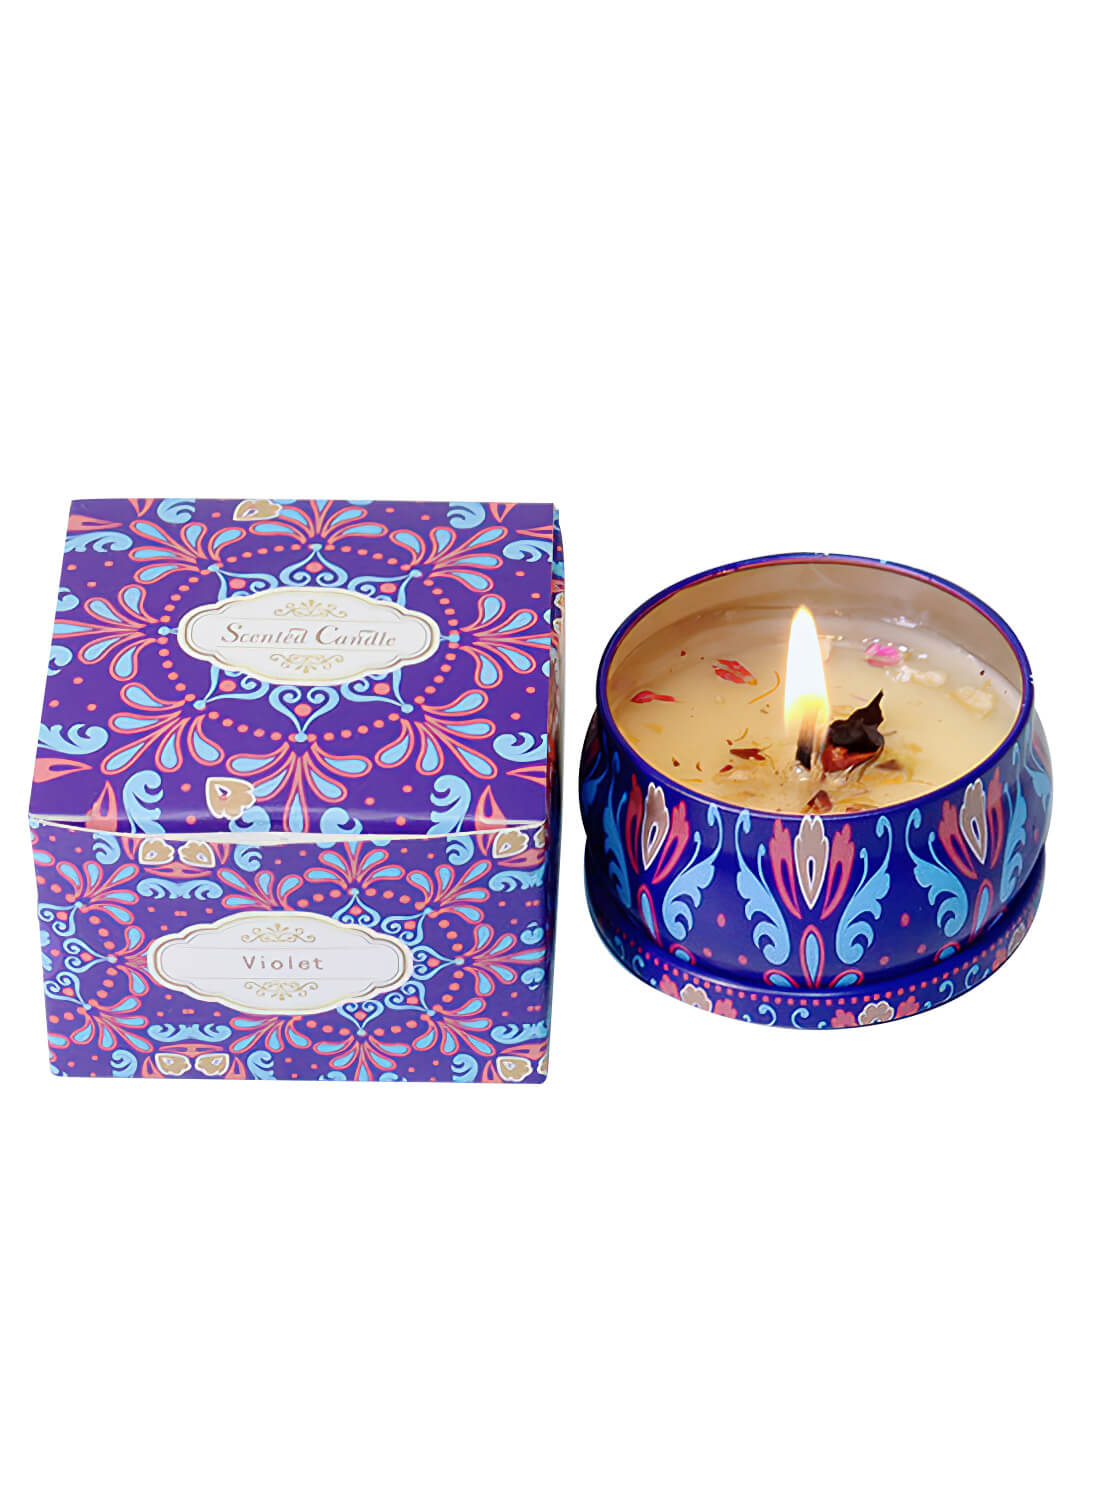 Scented Candles with Dry Flowers for Home SPA Bathing Yoga Travel Gift